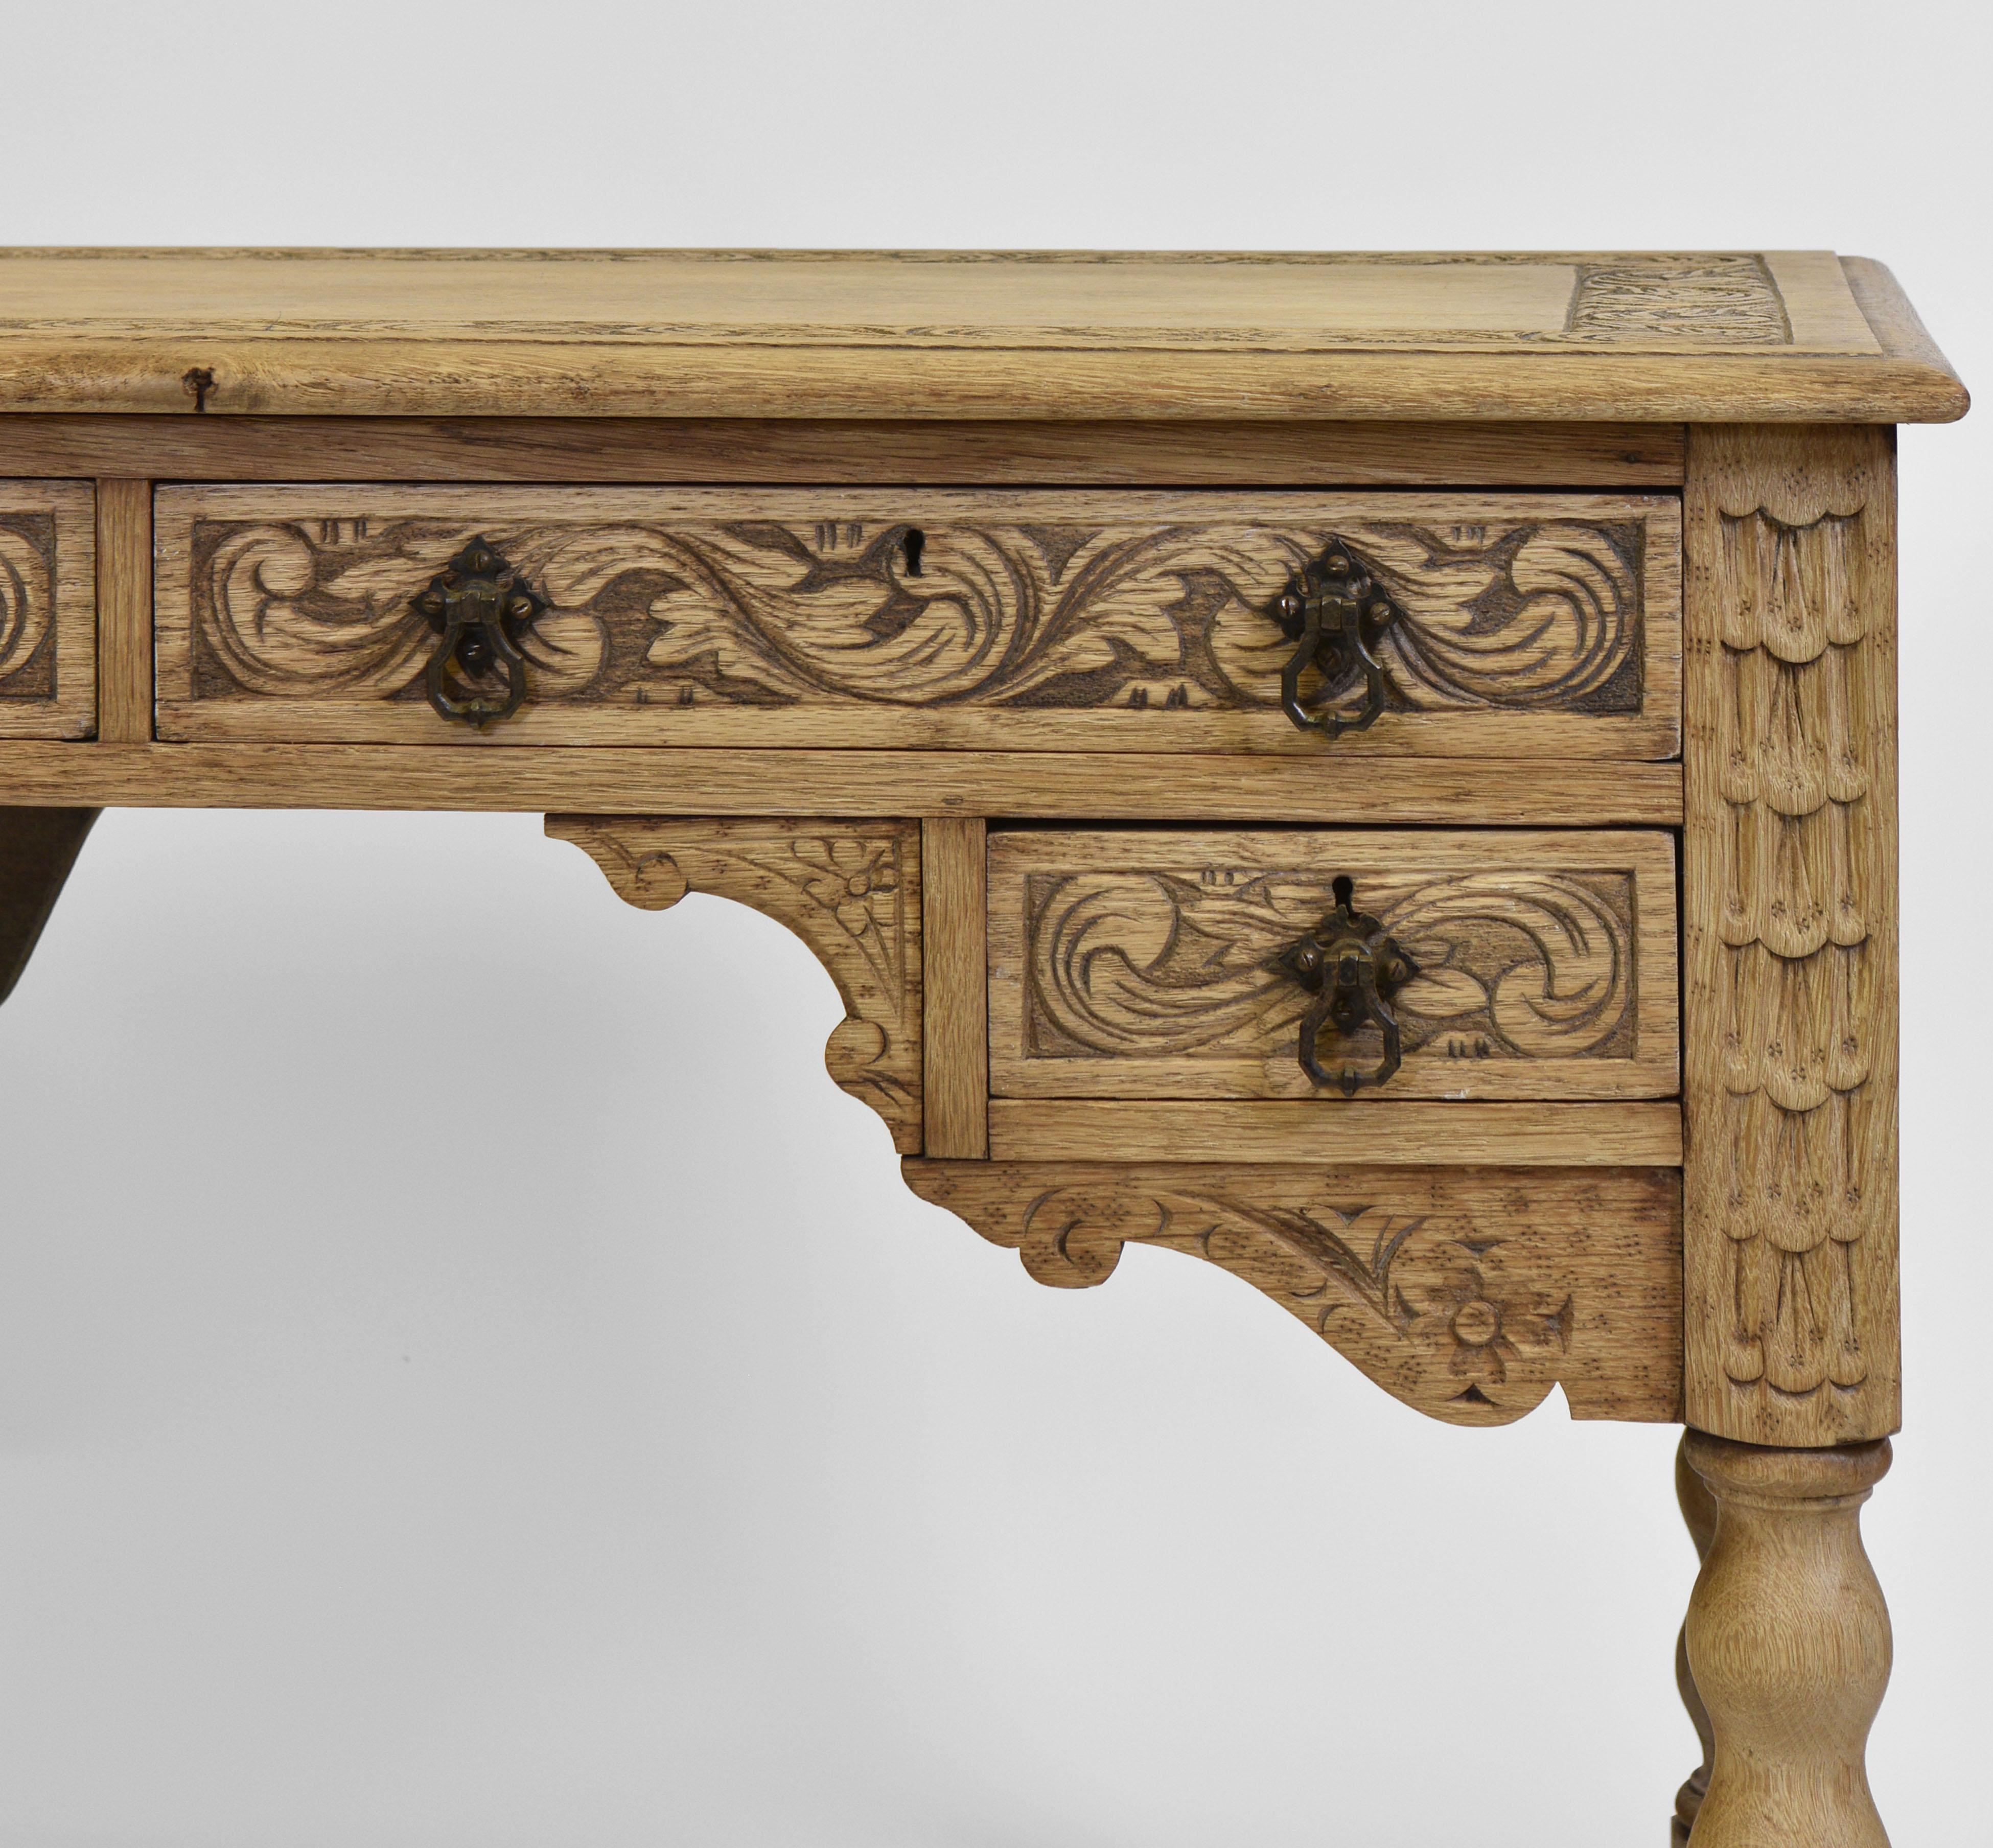 An antique bleached carved solid oak four drawer kneehole desk by Hewetson, Milner & Thexton Ltd - Tottenham Court Road London. Circa 1900. Labelled.

The bleached desk has been given a very light water based finish to add depth. It has the original